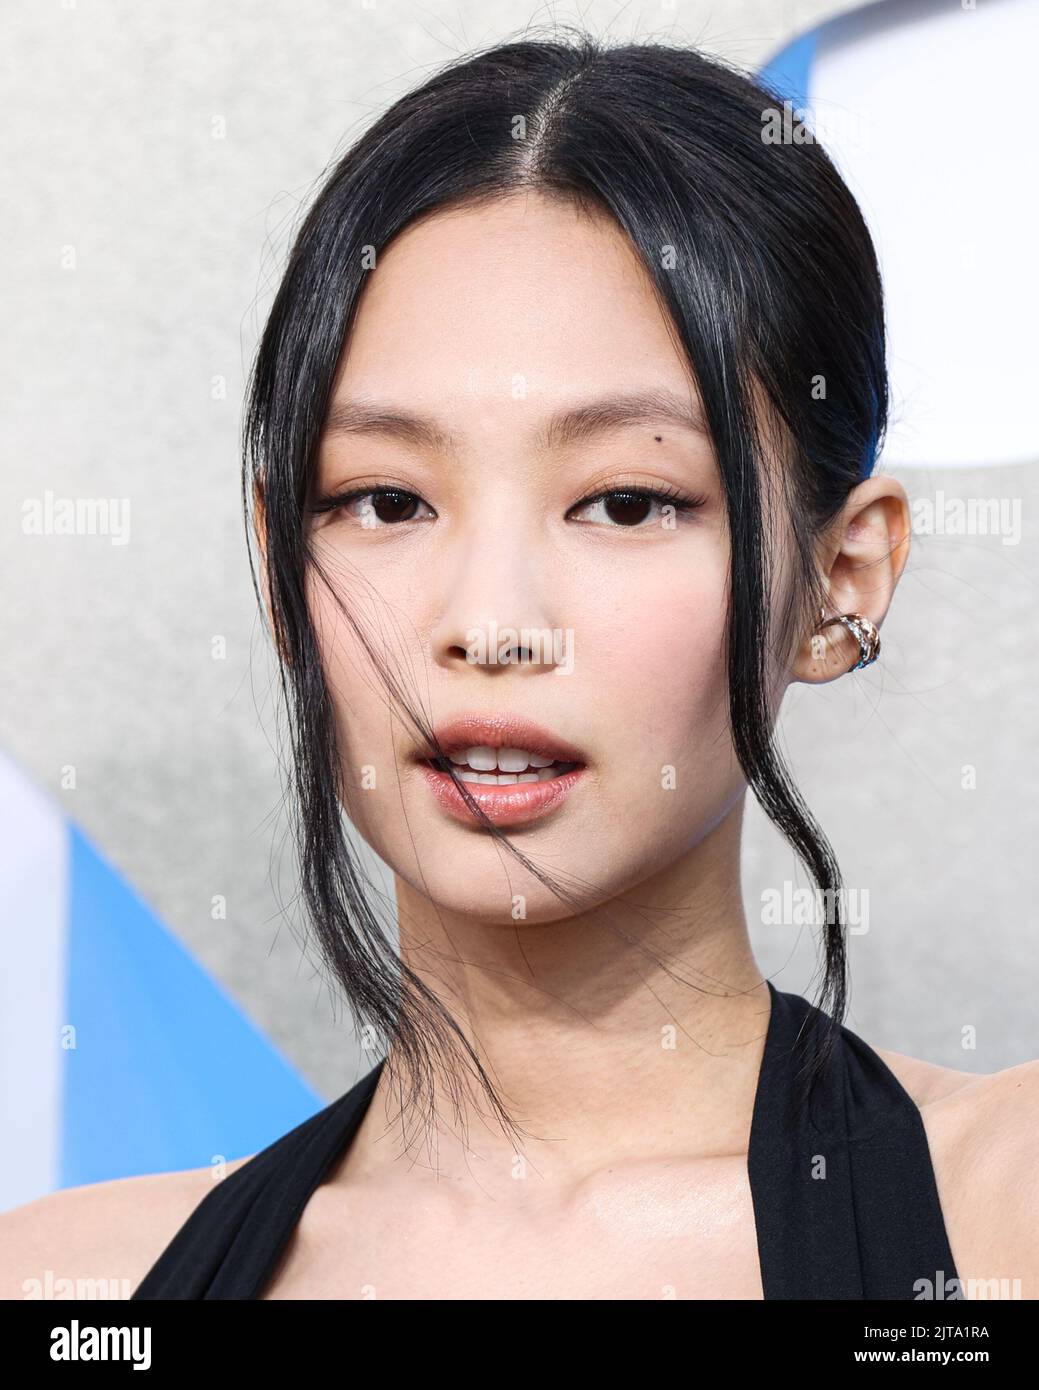 newark-new-jersey-usa-august-28-jennie-jennie-kim-of-blackpink-arrives-at-the-2022-mtv-video-music-awards-held-at-the-prudential-center-on-august-28-2022-in-newark-new-jersey-usa-photo-by-xavier-collinimage-press-agency-2JTA1RA.jpg